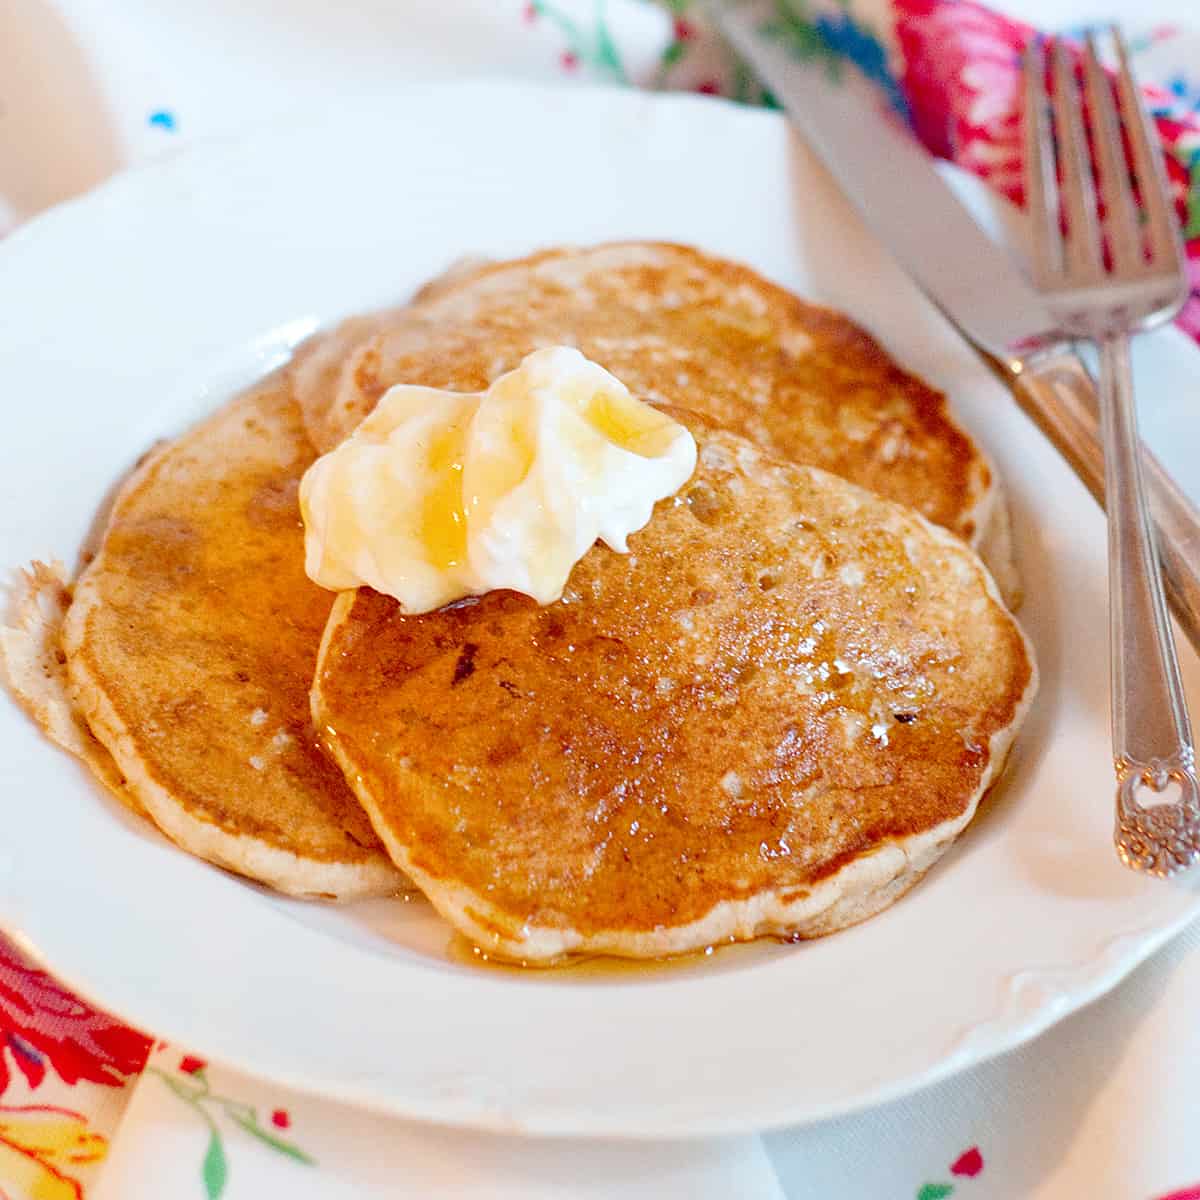 Finished pancakes topped with yogurt and syrup on a white serving plate.